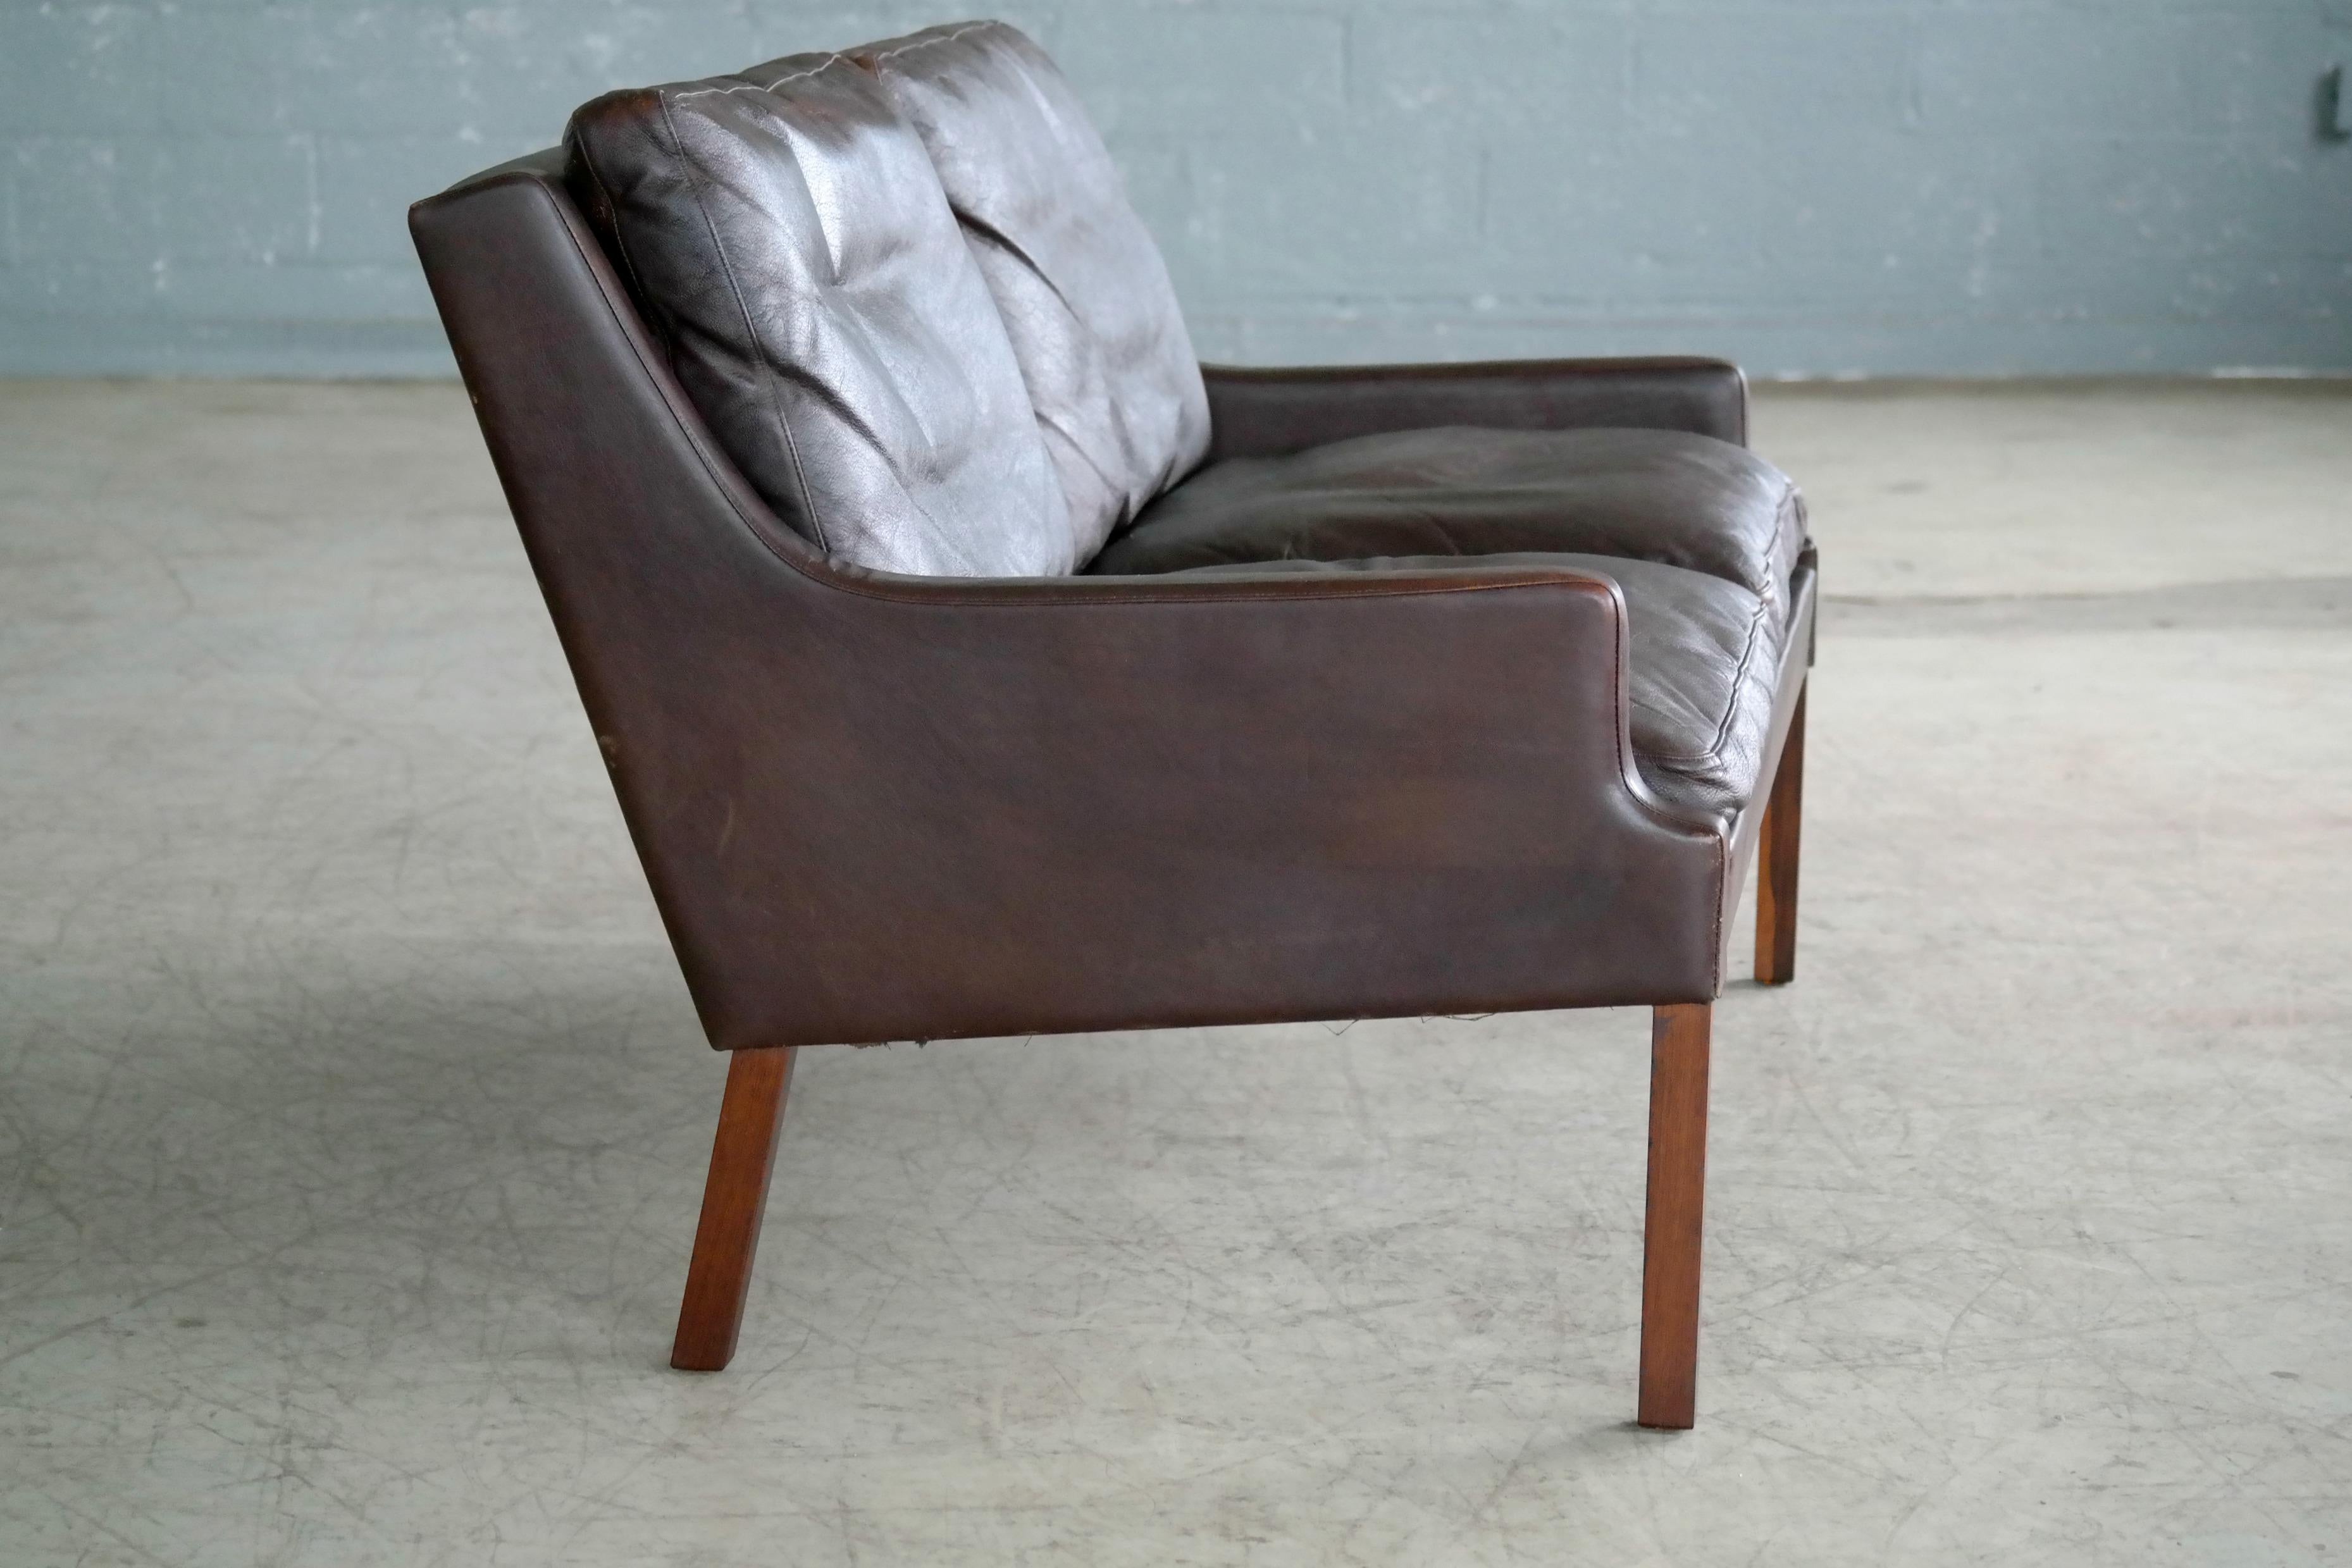 Mid-20th Century Danish 1960s Slim Profile Two-Seat Sofa in Espresso Leather by Georg Thams